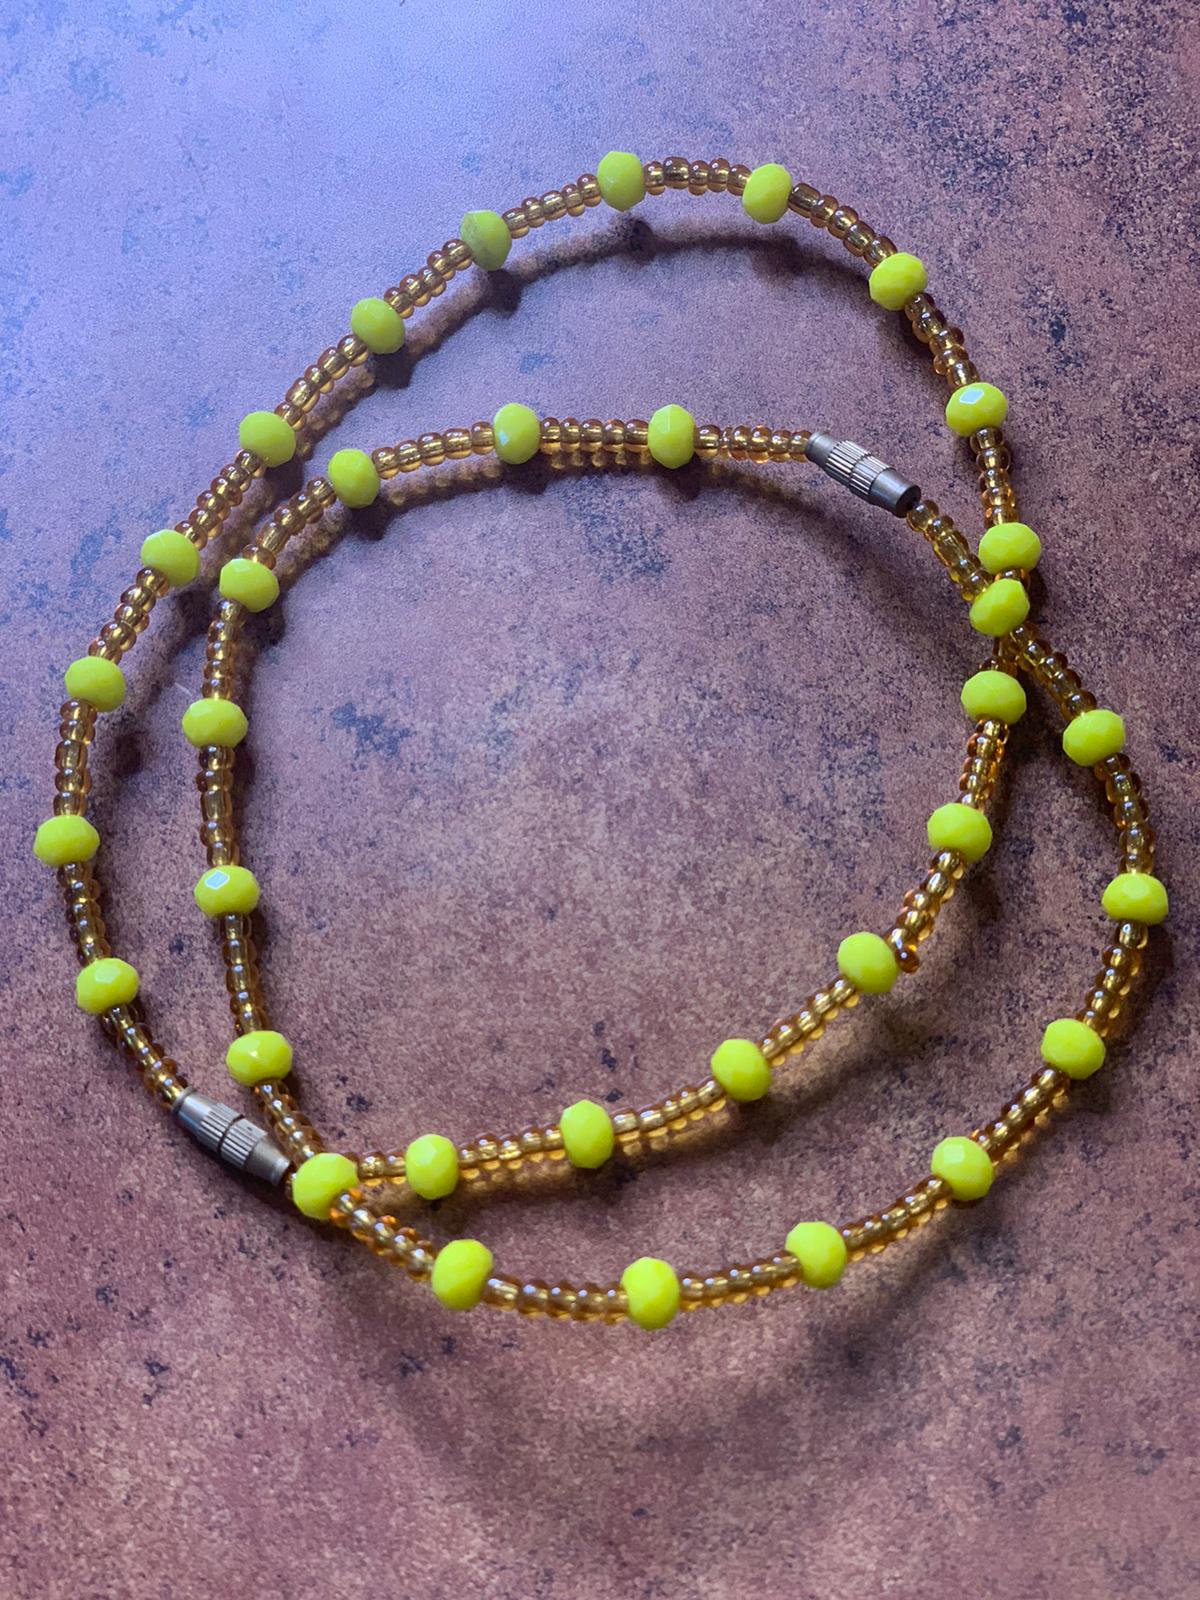 9 Inches Gold Glass Beads With Yellow Pebble Bars Removable Screw Anklet